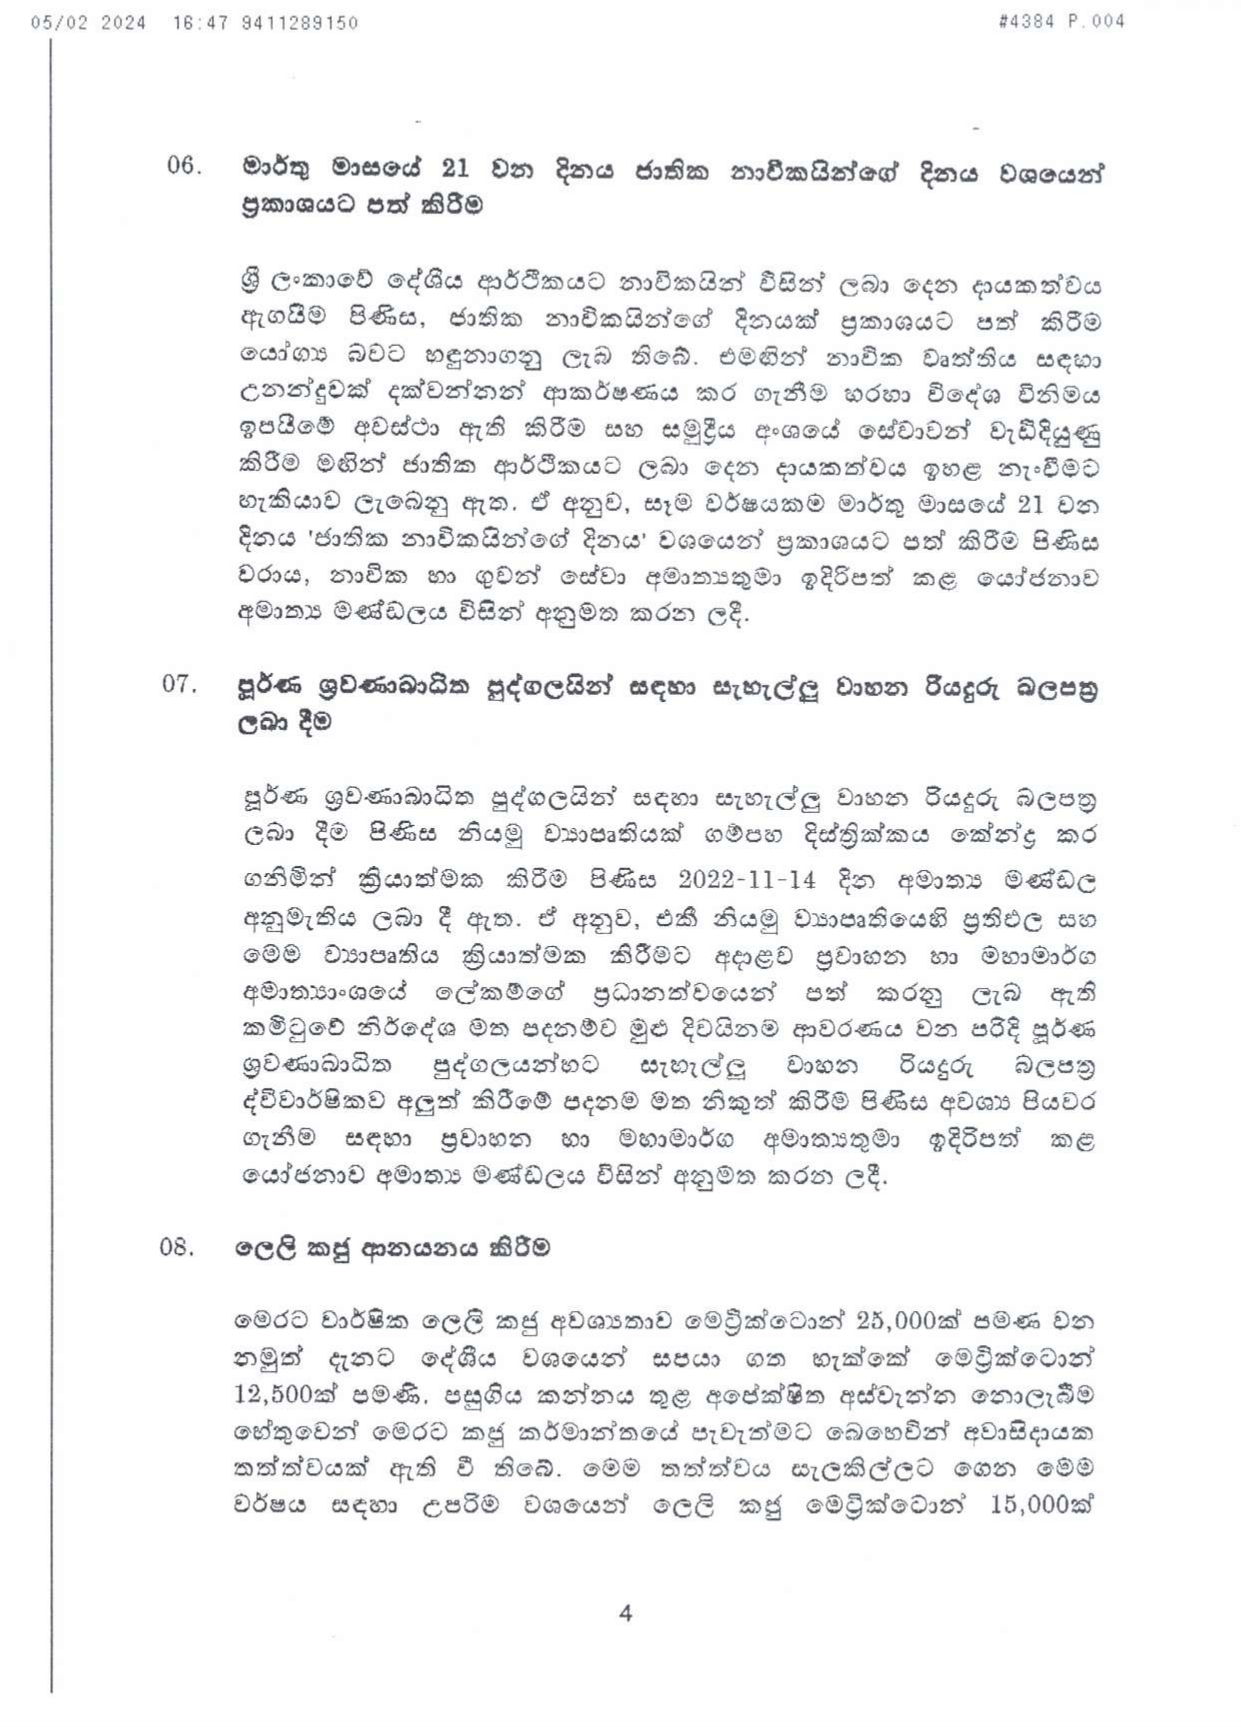 Cabinet Decision on 05.02.2024 page 0004